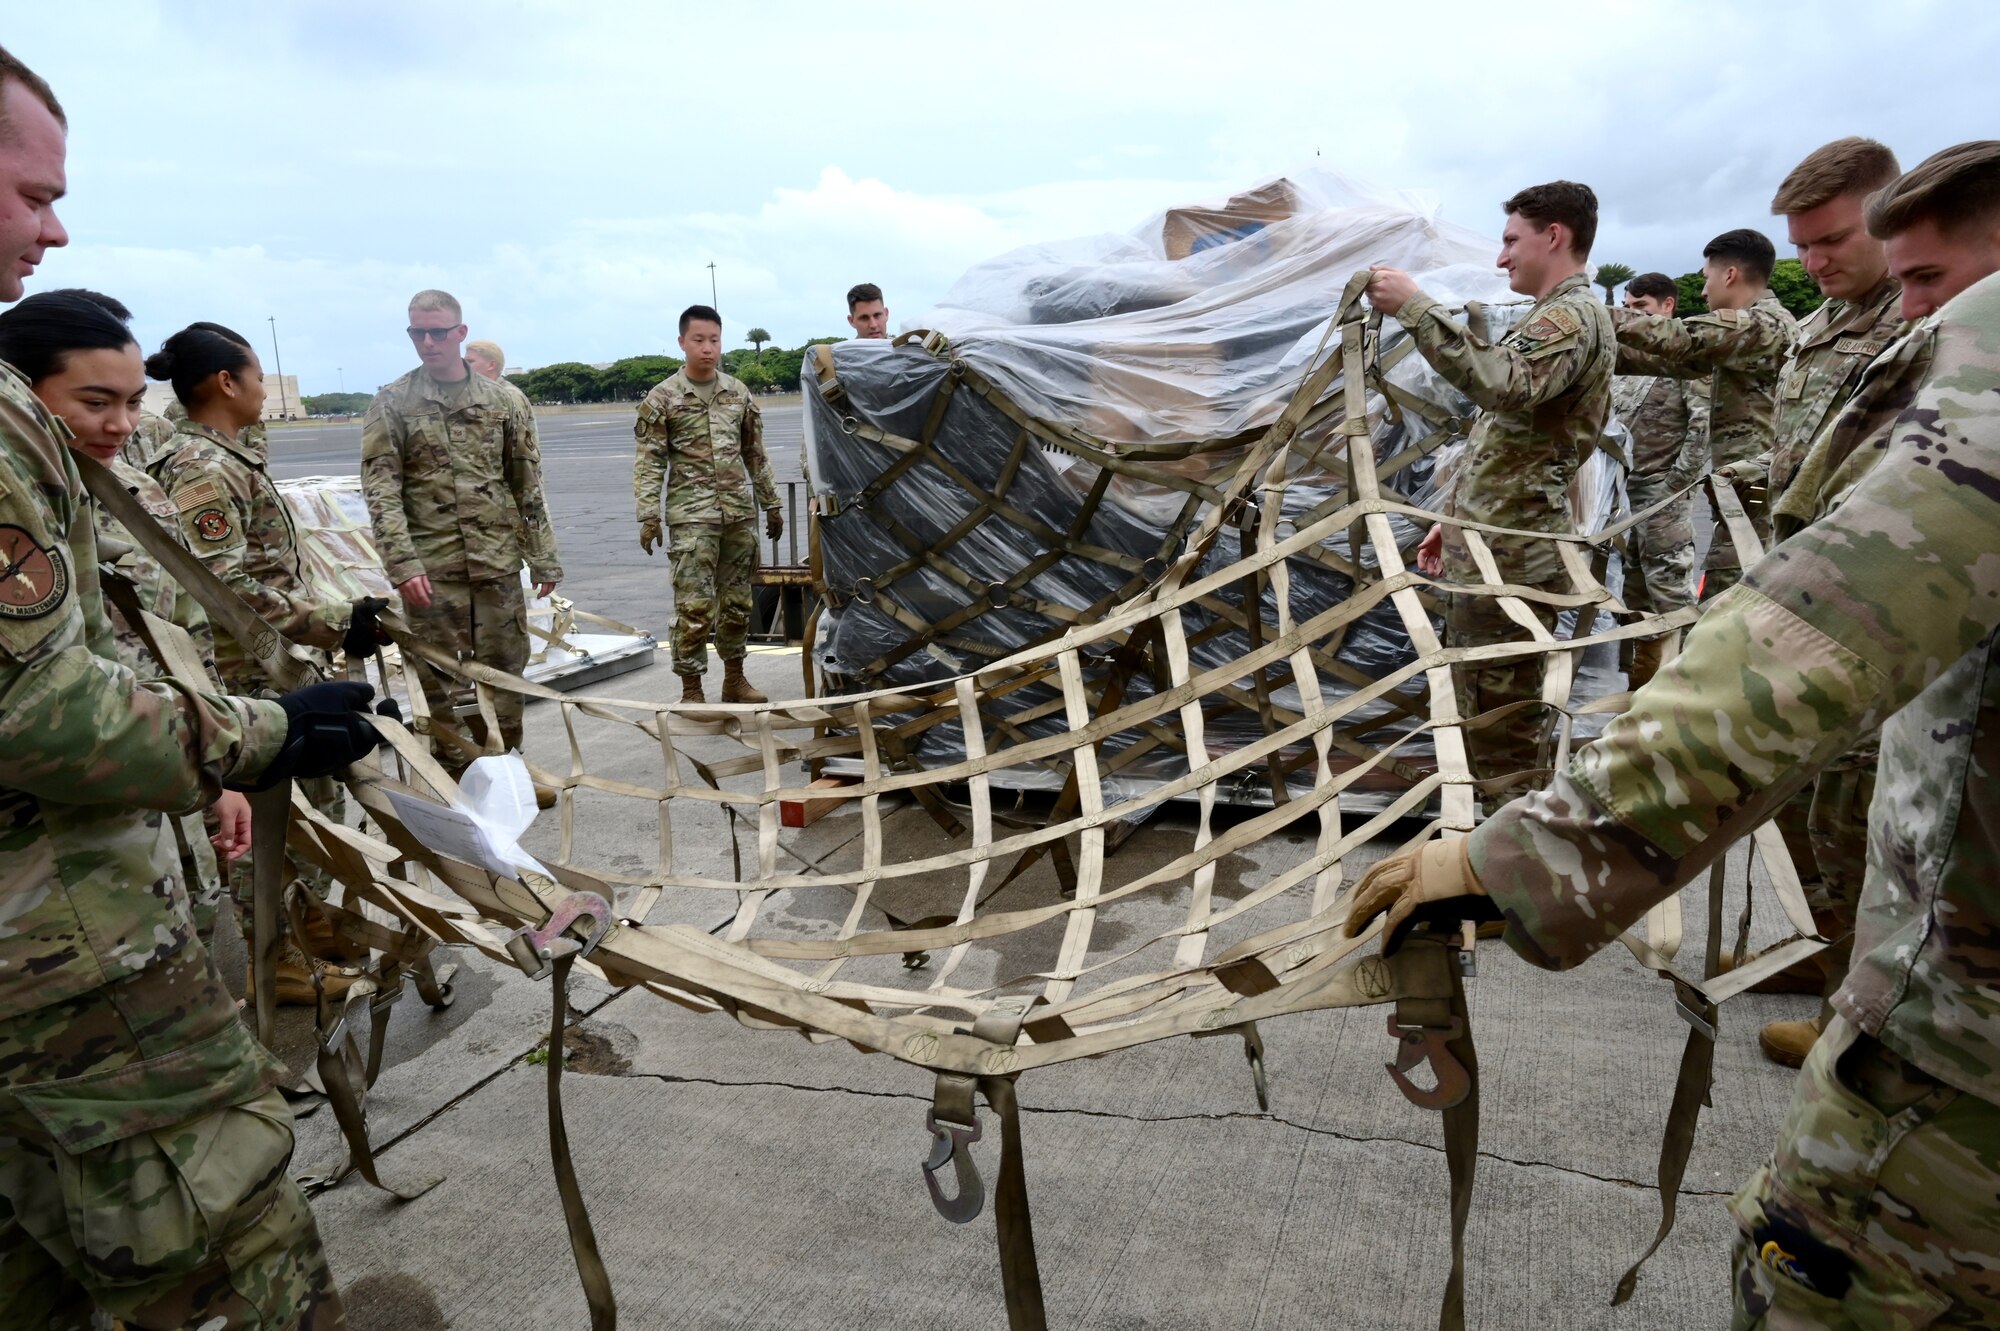 Airmen prepare to attach a cargo net to a simulated-cargo pallet during the 15th Wing’s Multi-Capable Airmen Tier 1 training event at Joint Base Pearl Harbor-Hickam, Hawaii, May 19, 2022. Tier 1 training provided Airmen with a baseline set of advanced expeditionary training tasks that all MCA will receive. (U.S. Air Force photo by 1st Lt. Benjamin Aronson)